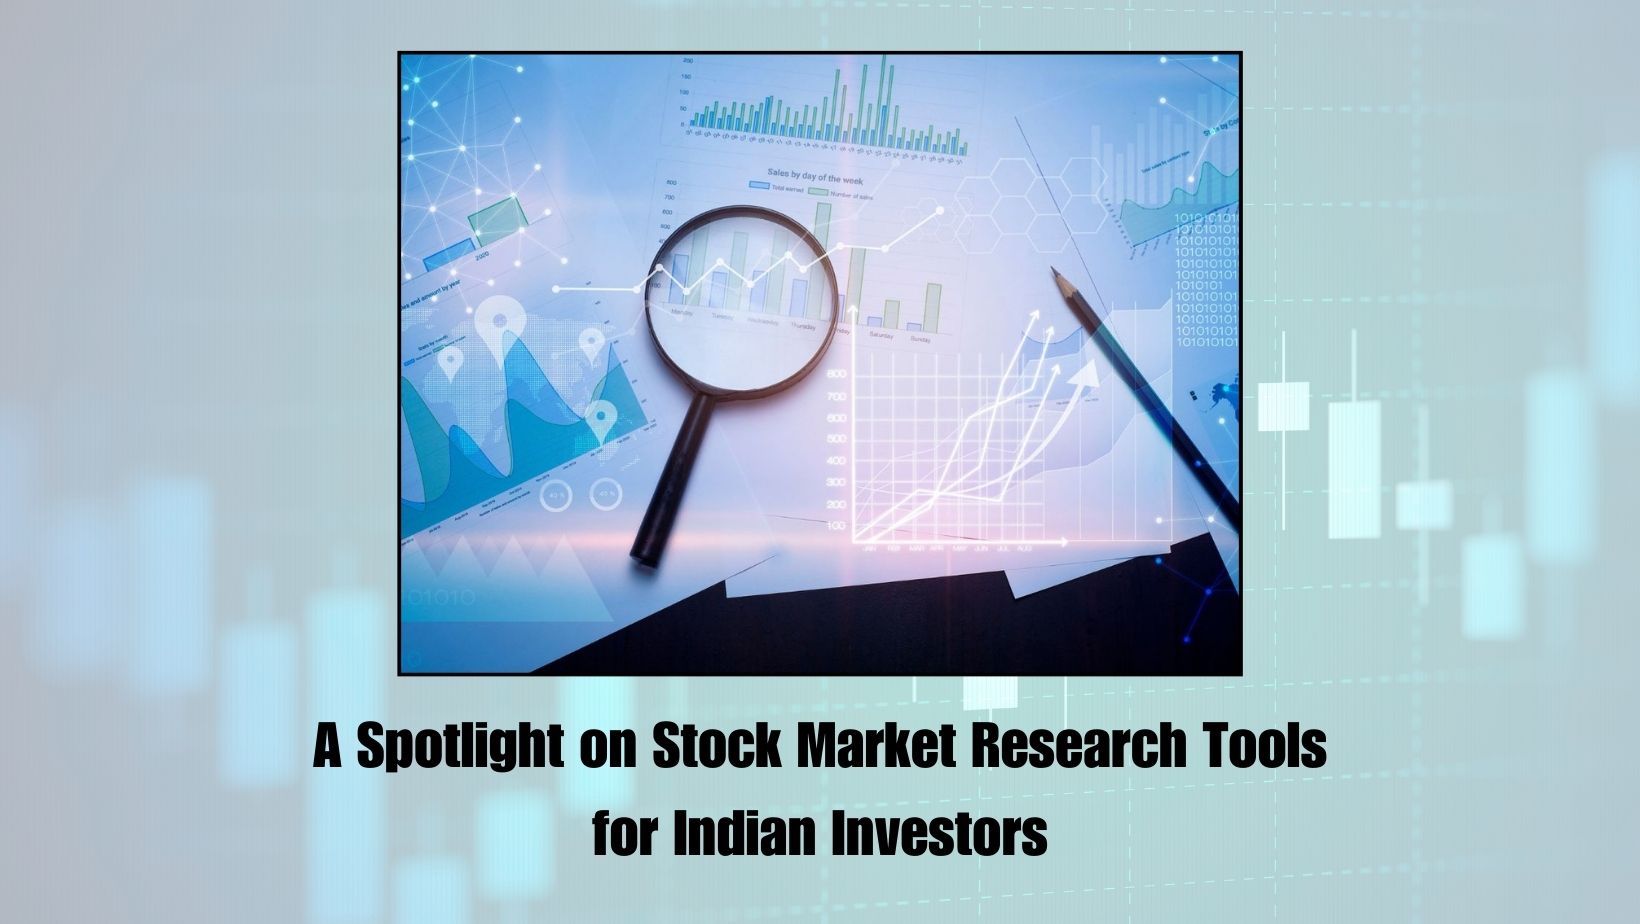 A Spotlight on Stock Market Research Tools for Indian Investors.